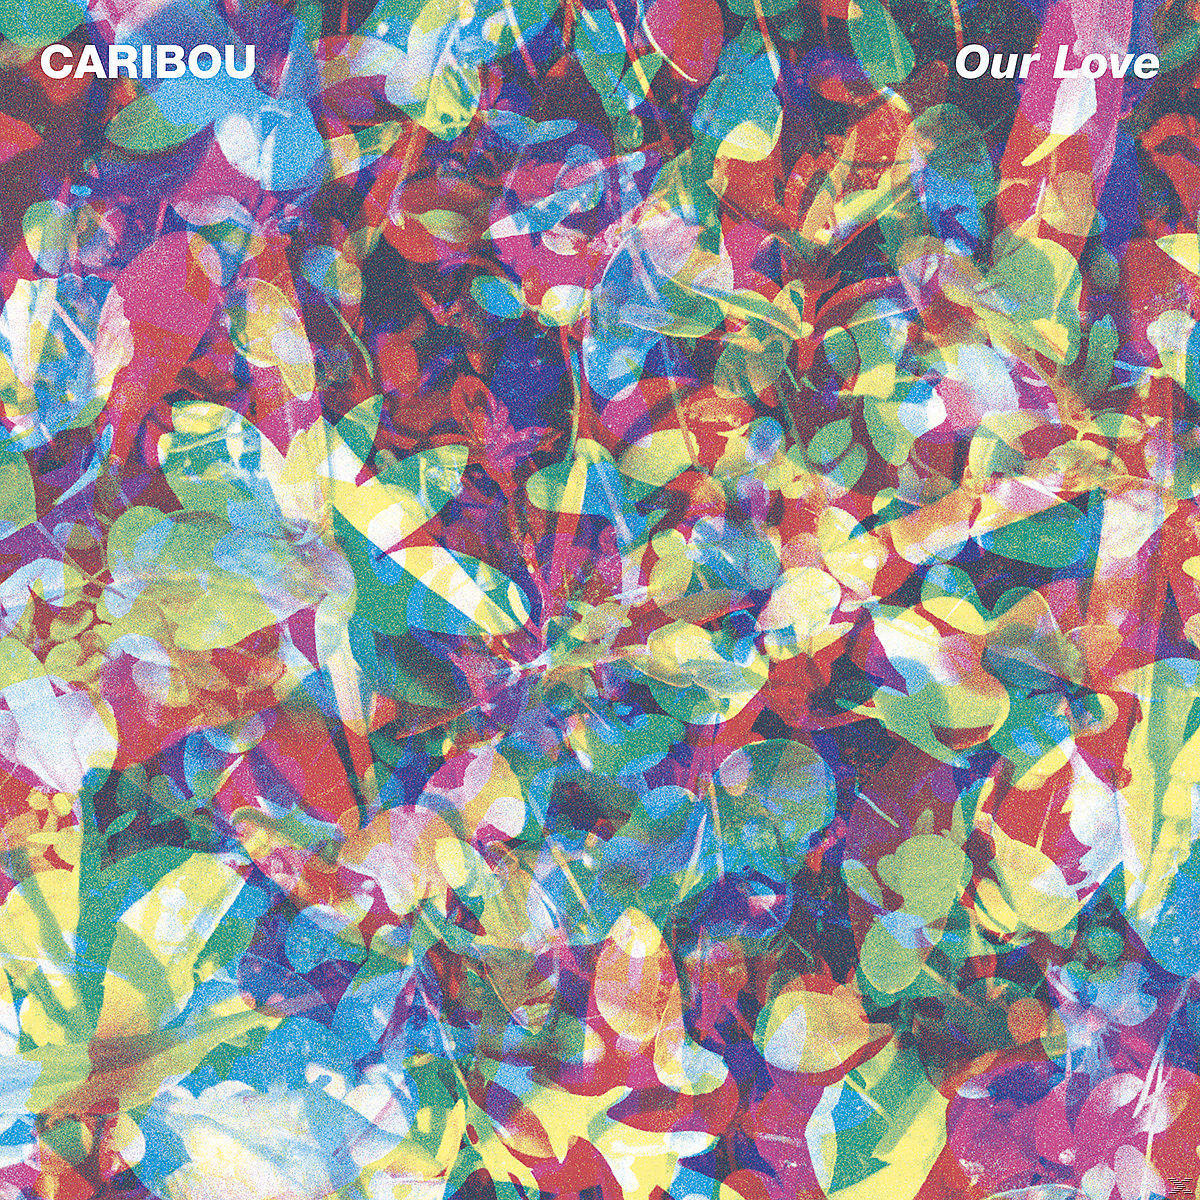 Our Caribou Love (CD) - -